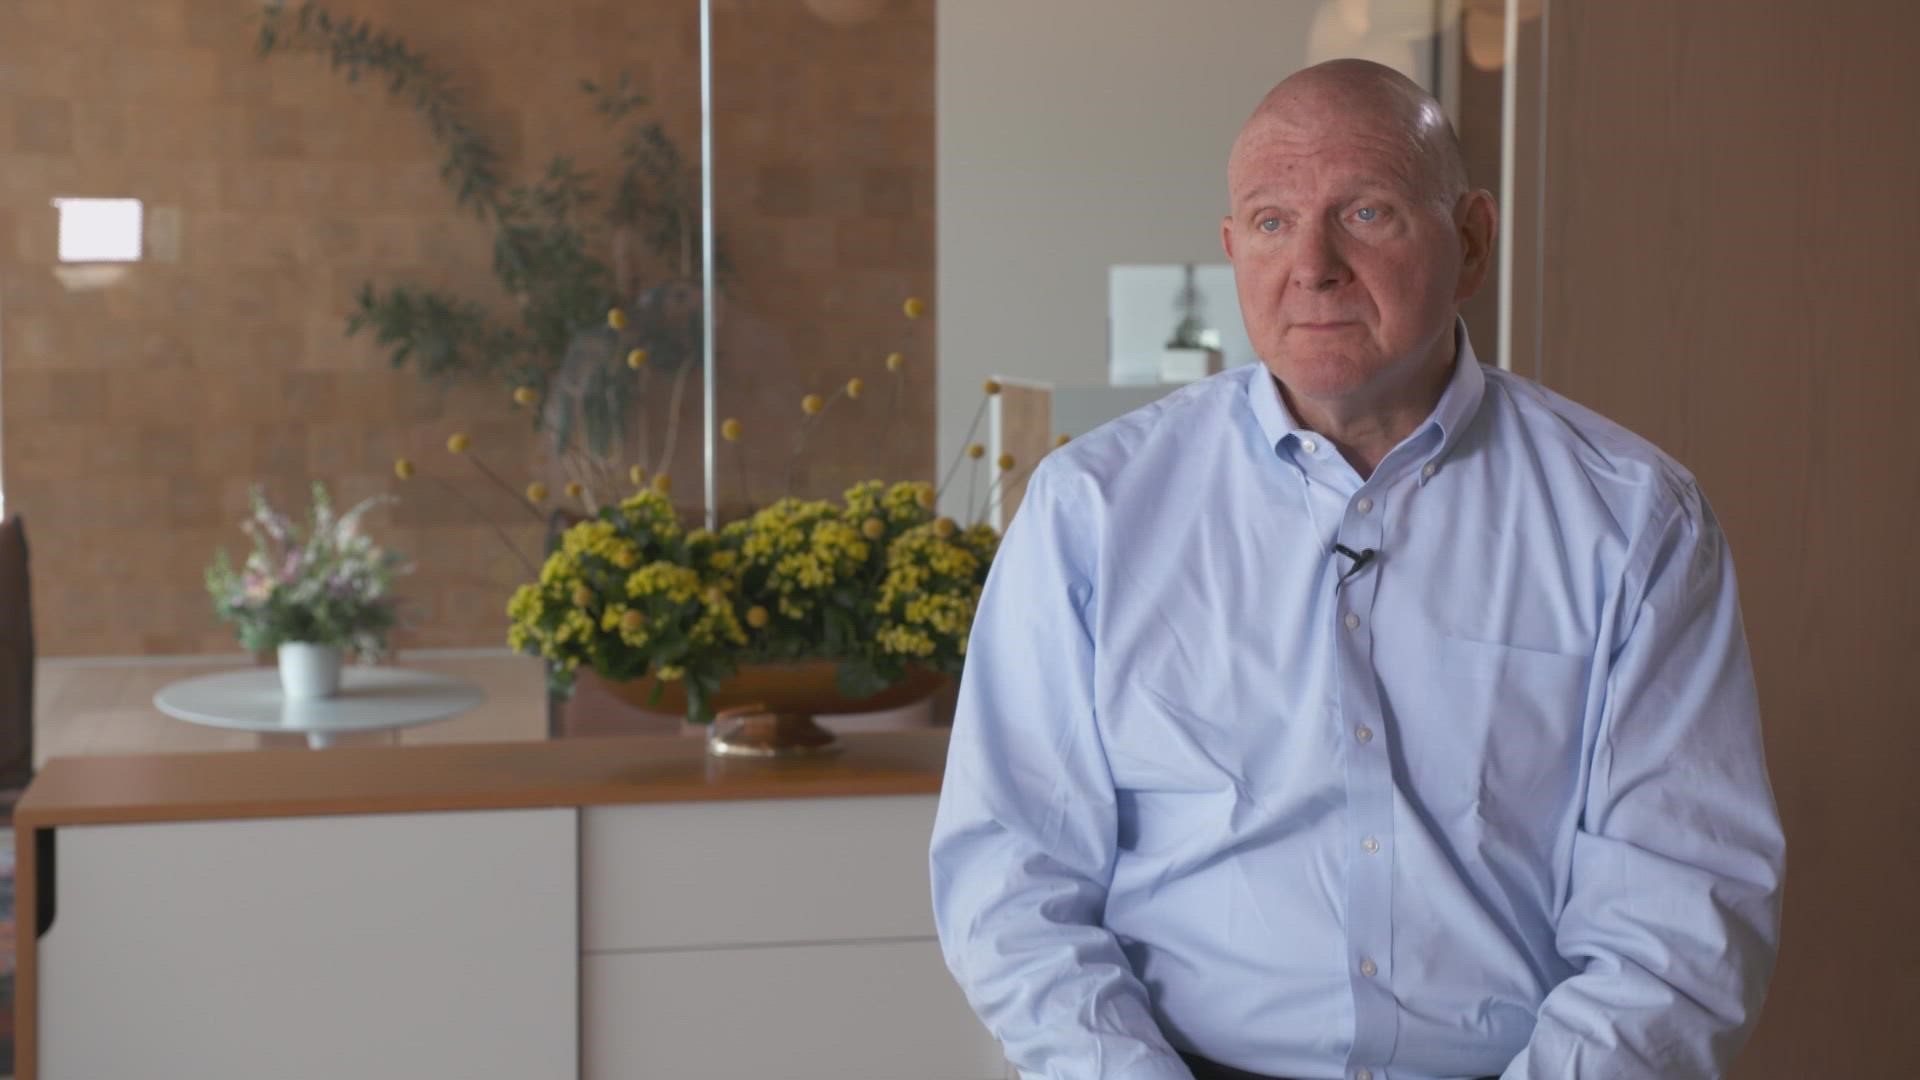 Ballmer explains what led him to launch his own non-profit focused on separating fact from fiction.